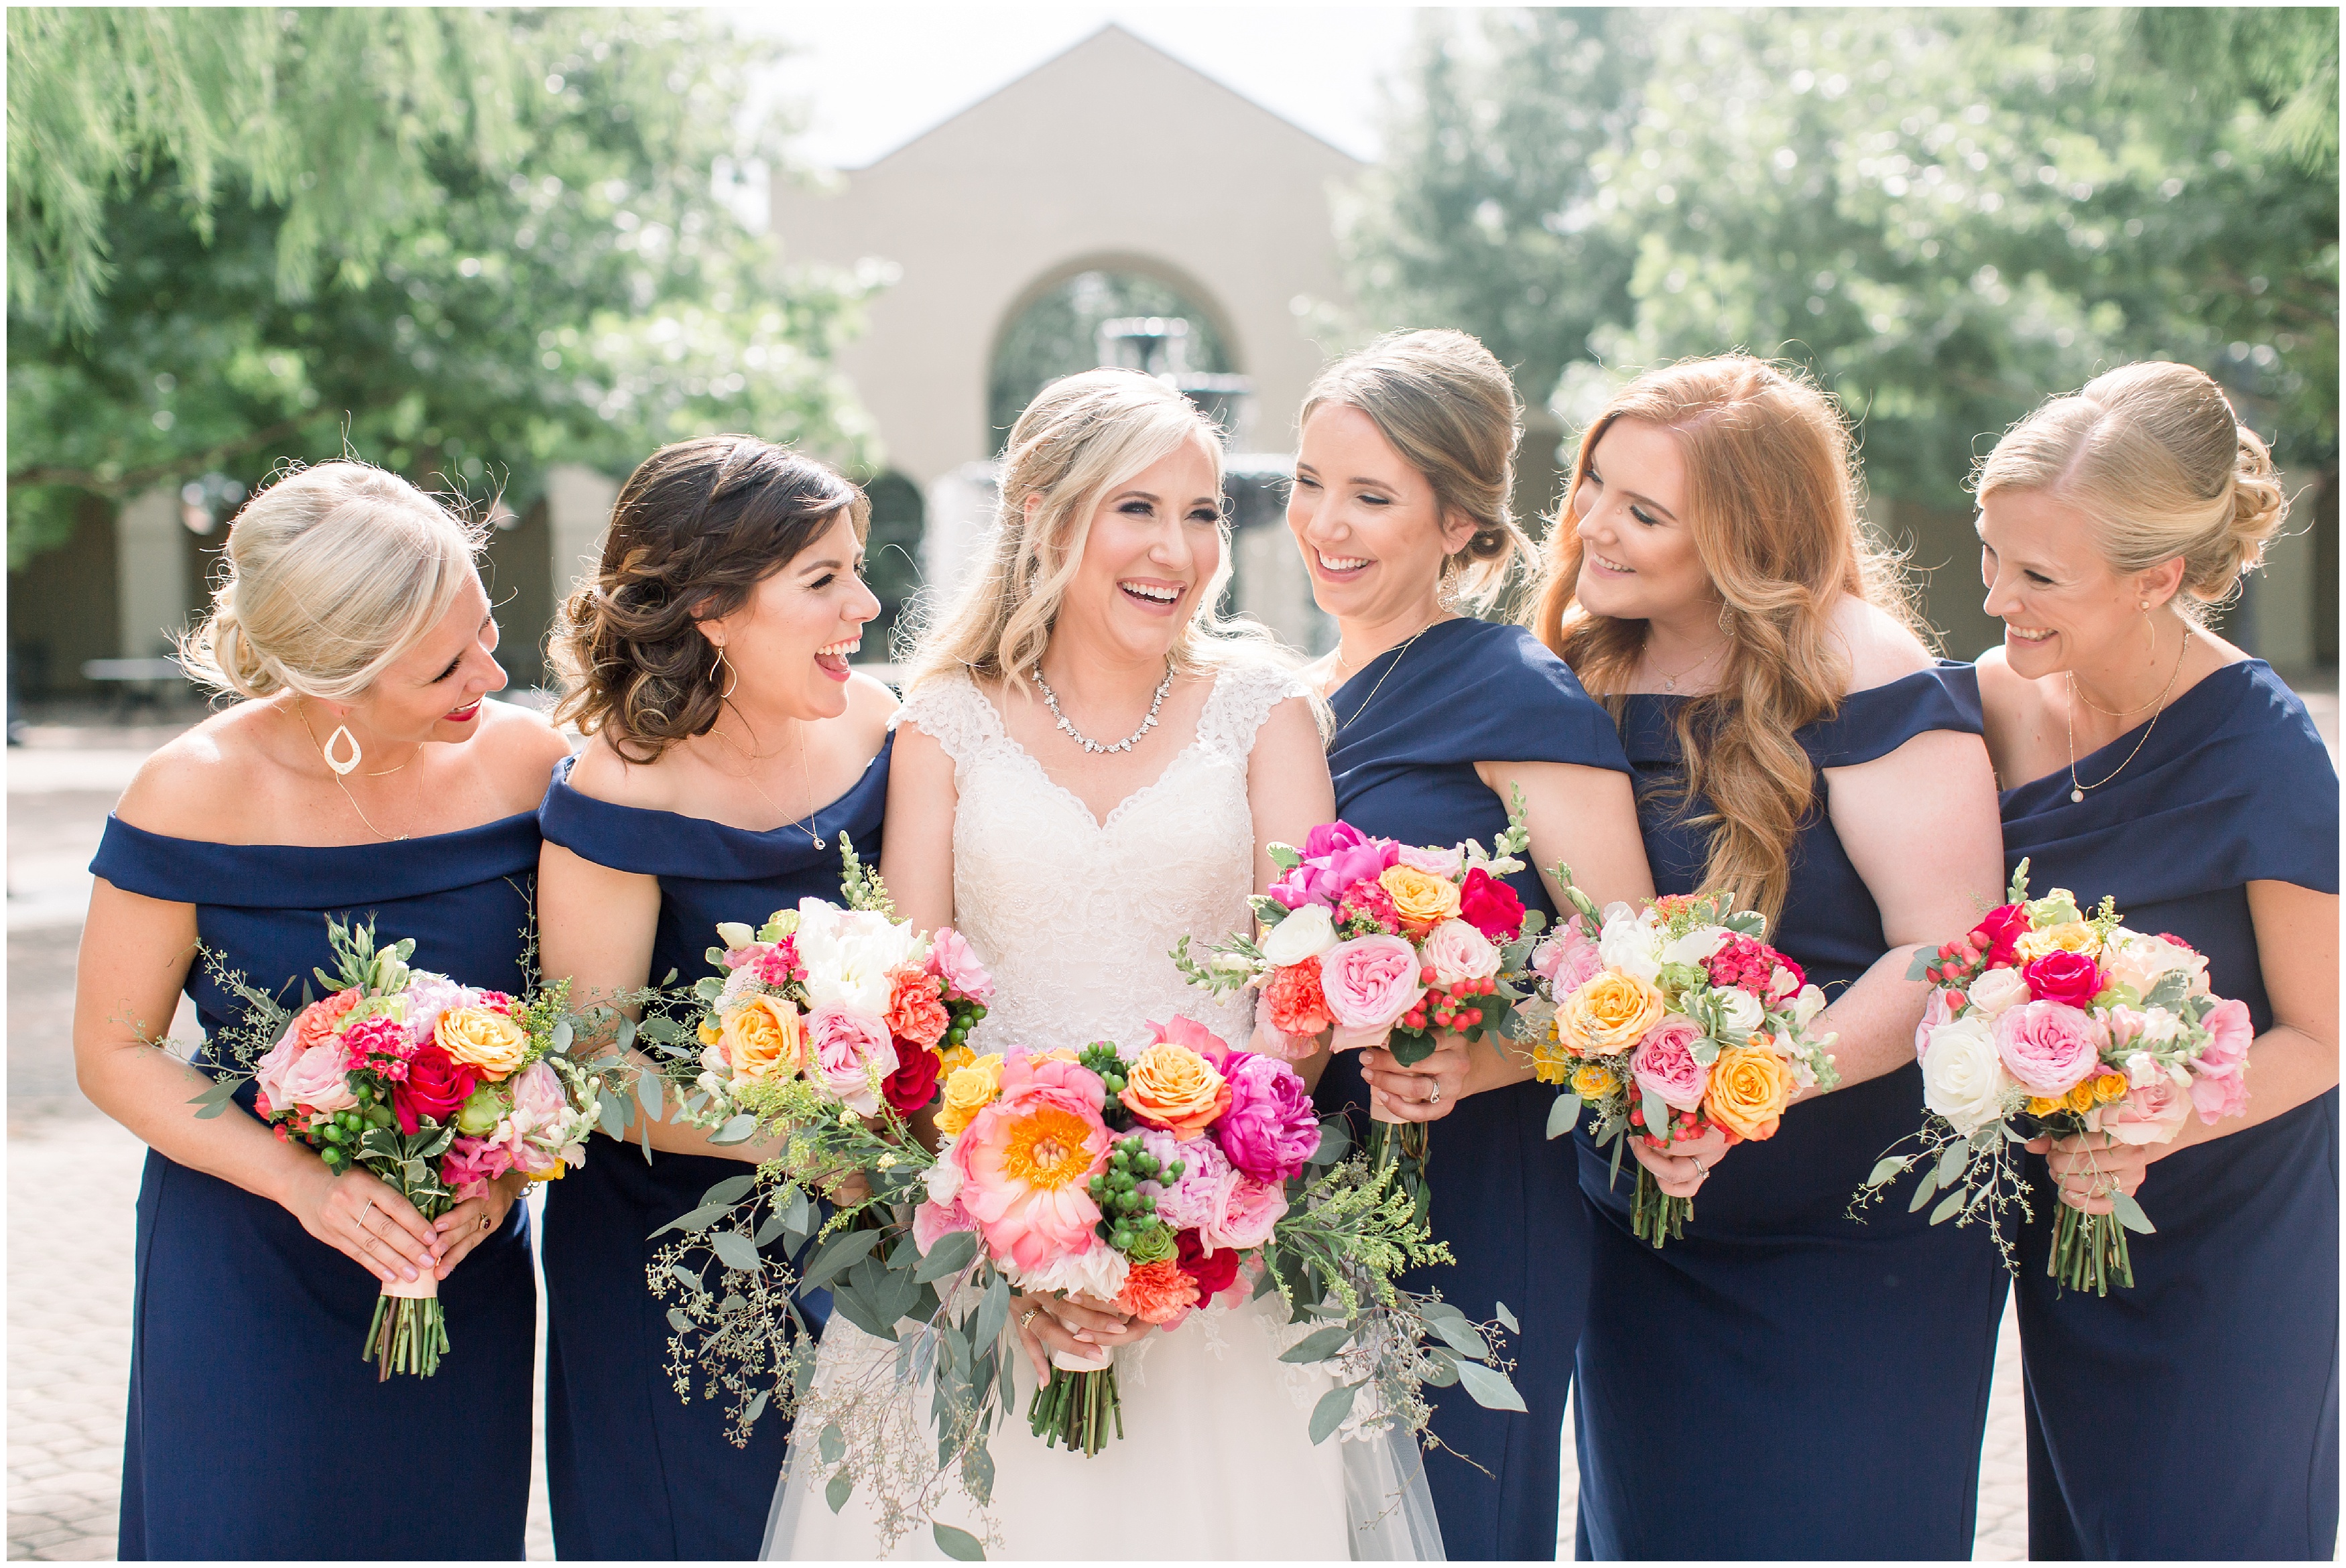 St. Ann's Catholic Wedding in Coppell, TX by photographer Courtney Bosworth.